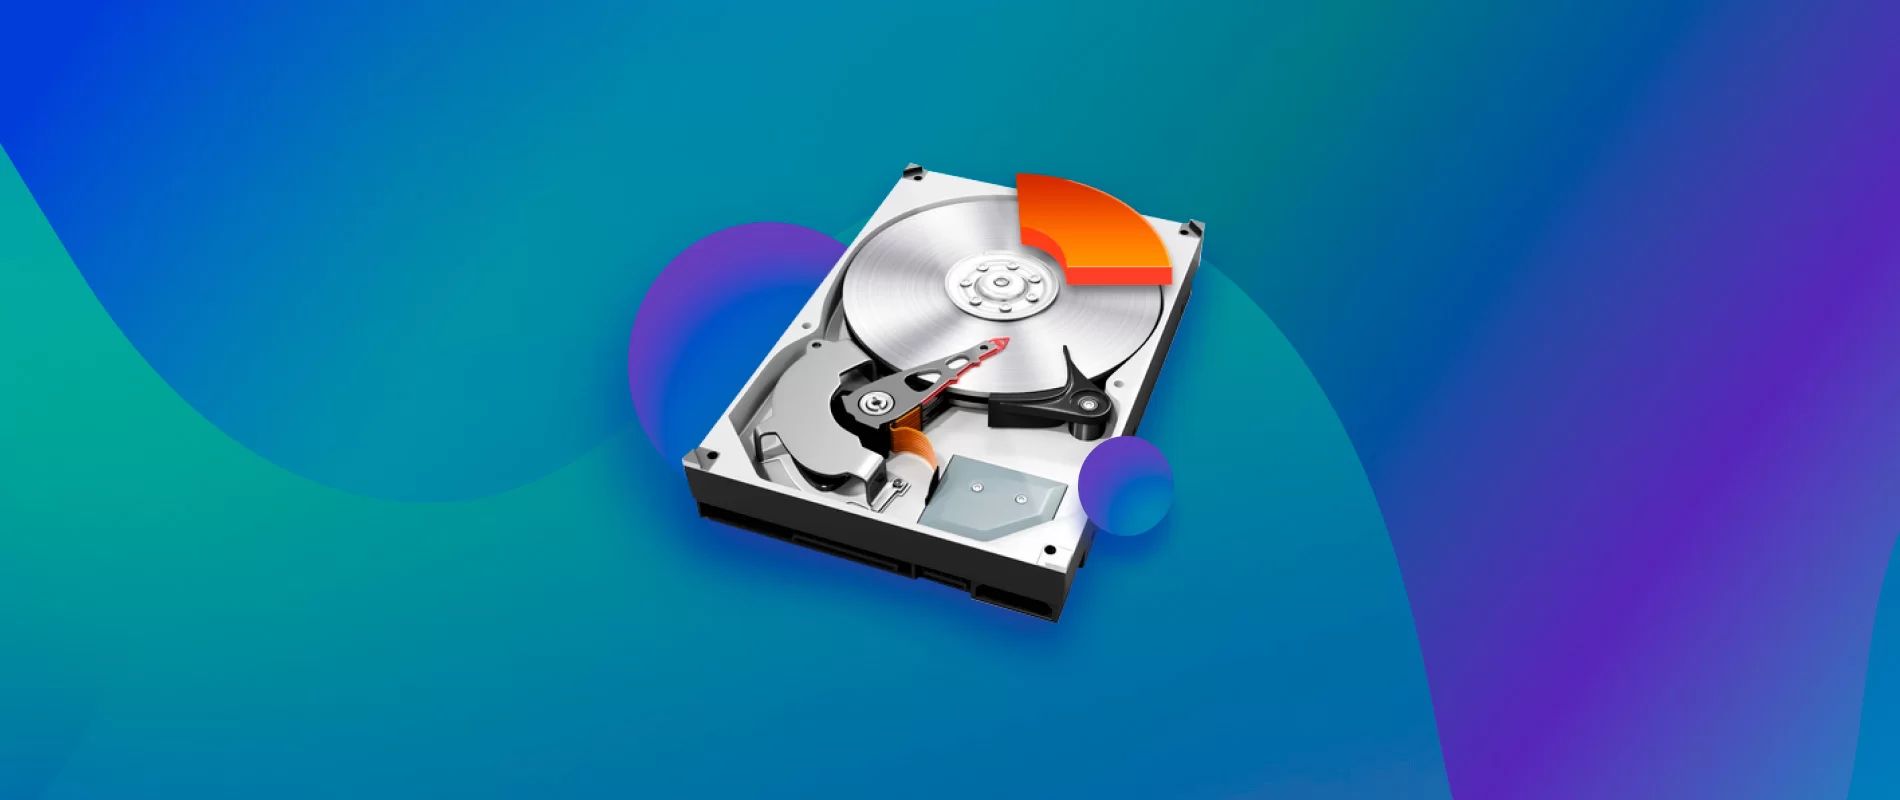 What Is A Winre Hard Disk Drive?